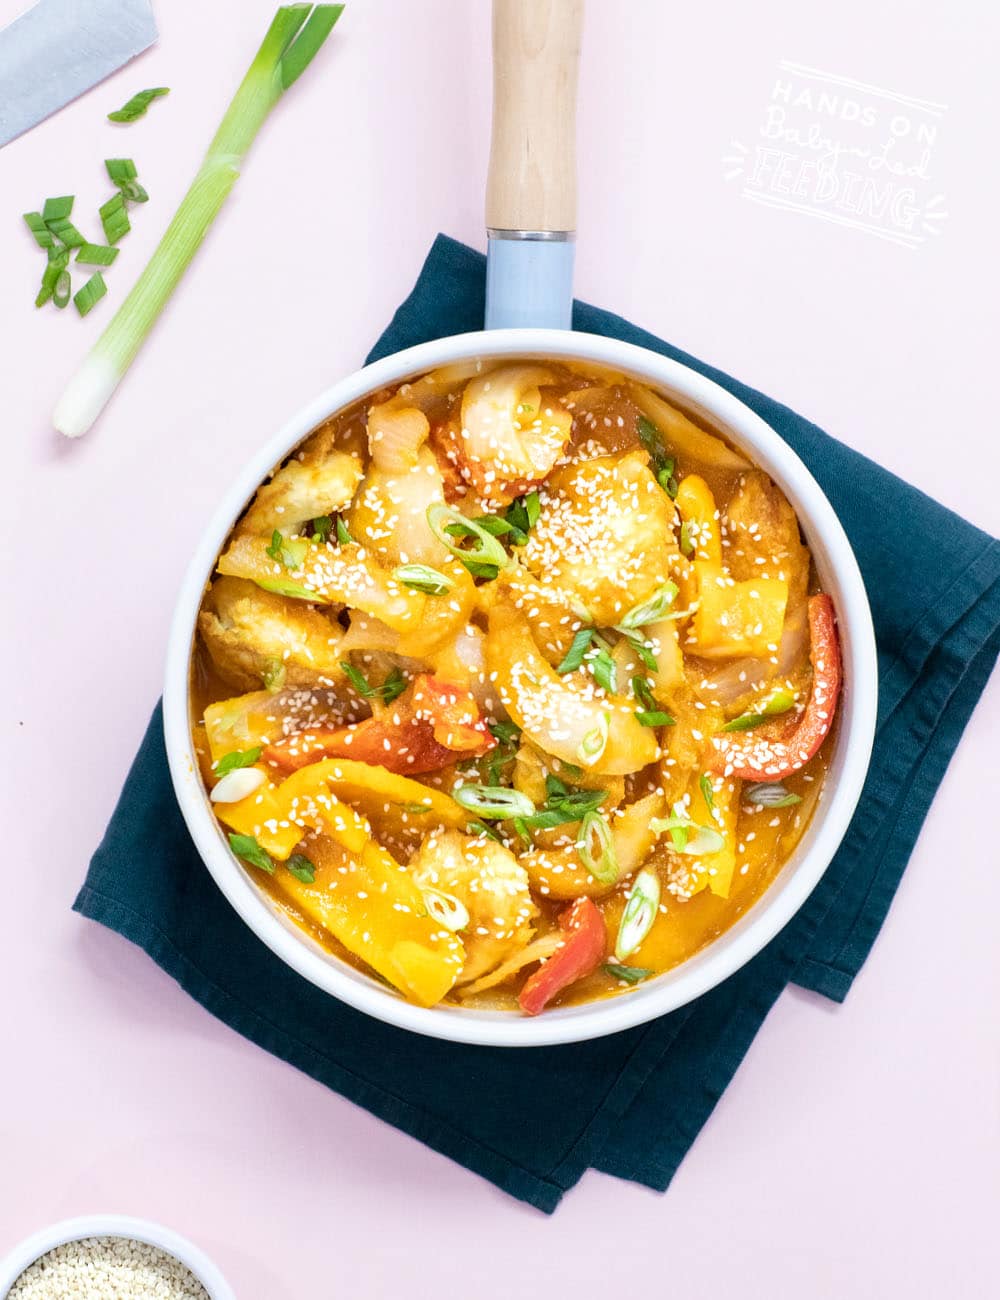 Refined Sugar Free Sweet & Sour Chicken with Tofu vegetarian option. Sweet and tangy pineapple, red peppers, yellow peppers, and fresh ginger make this Asian inspired dish a powerhouse for vitamin C. Make a double or triple batch for a freezer friendly quick meal for busy days. #babyledweaning #babyledfeeding #vitaminC